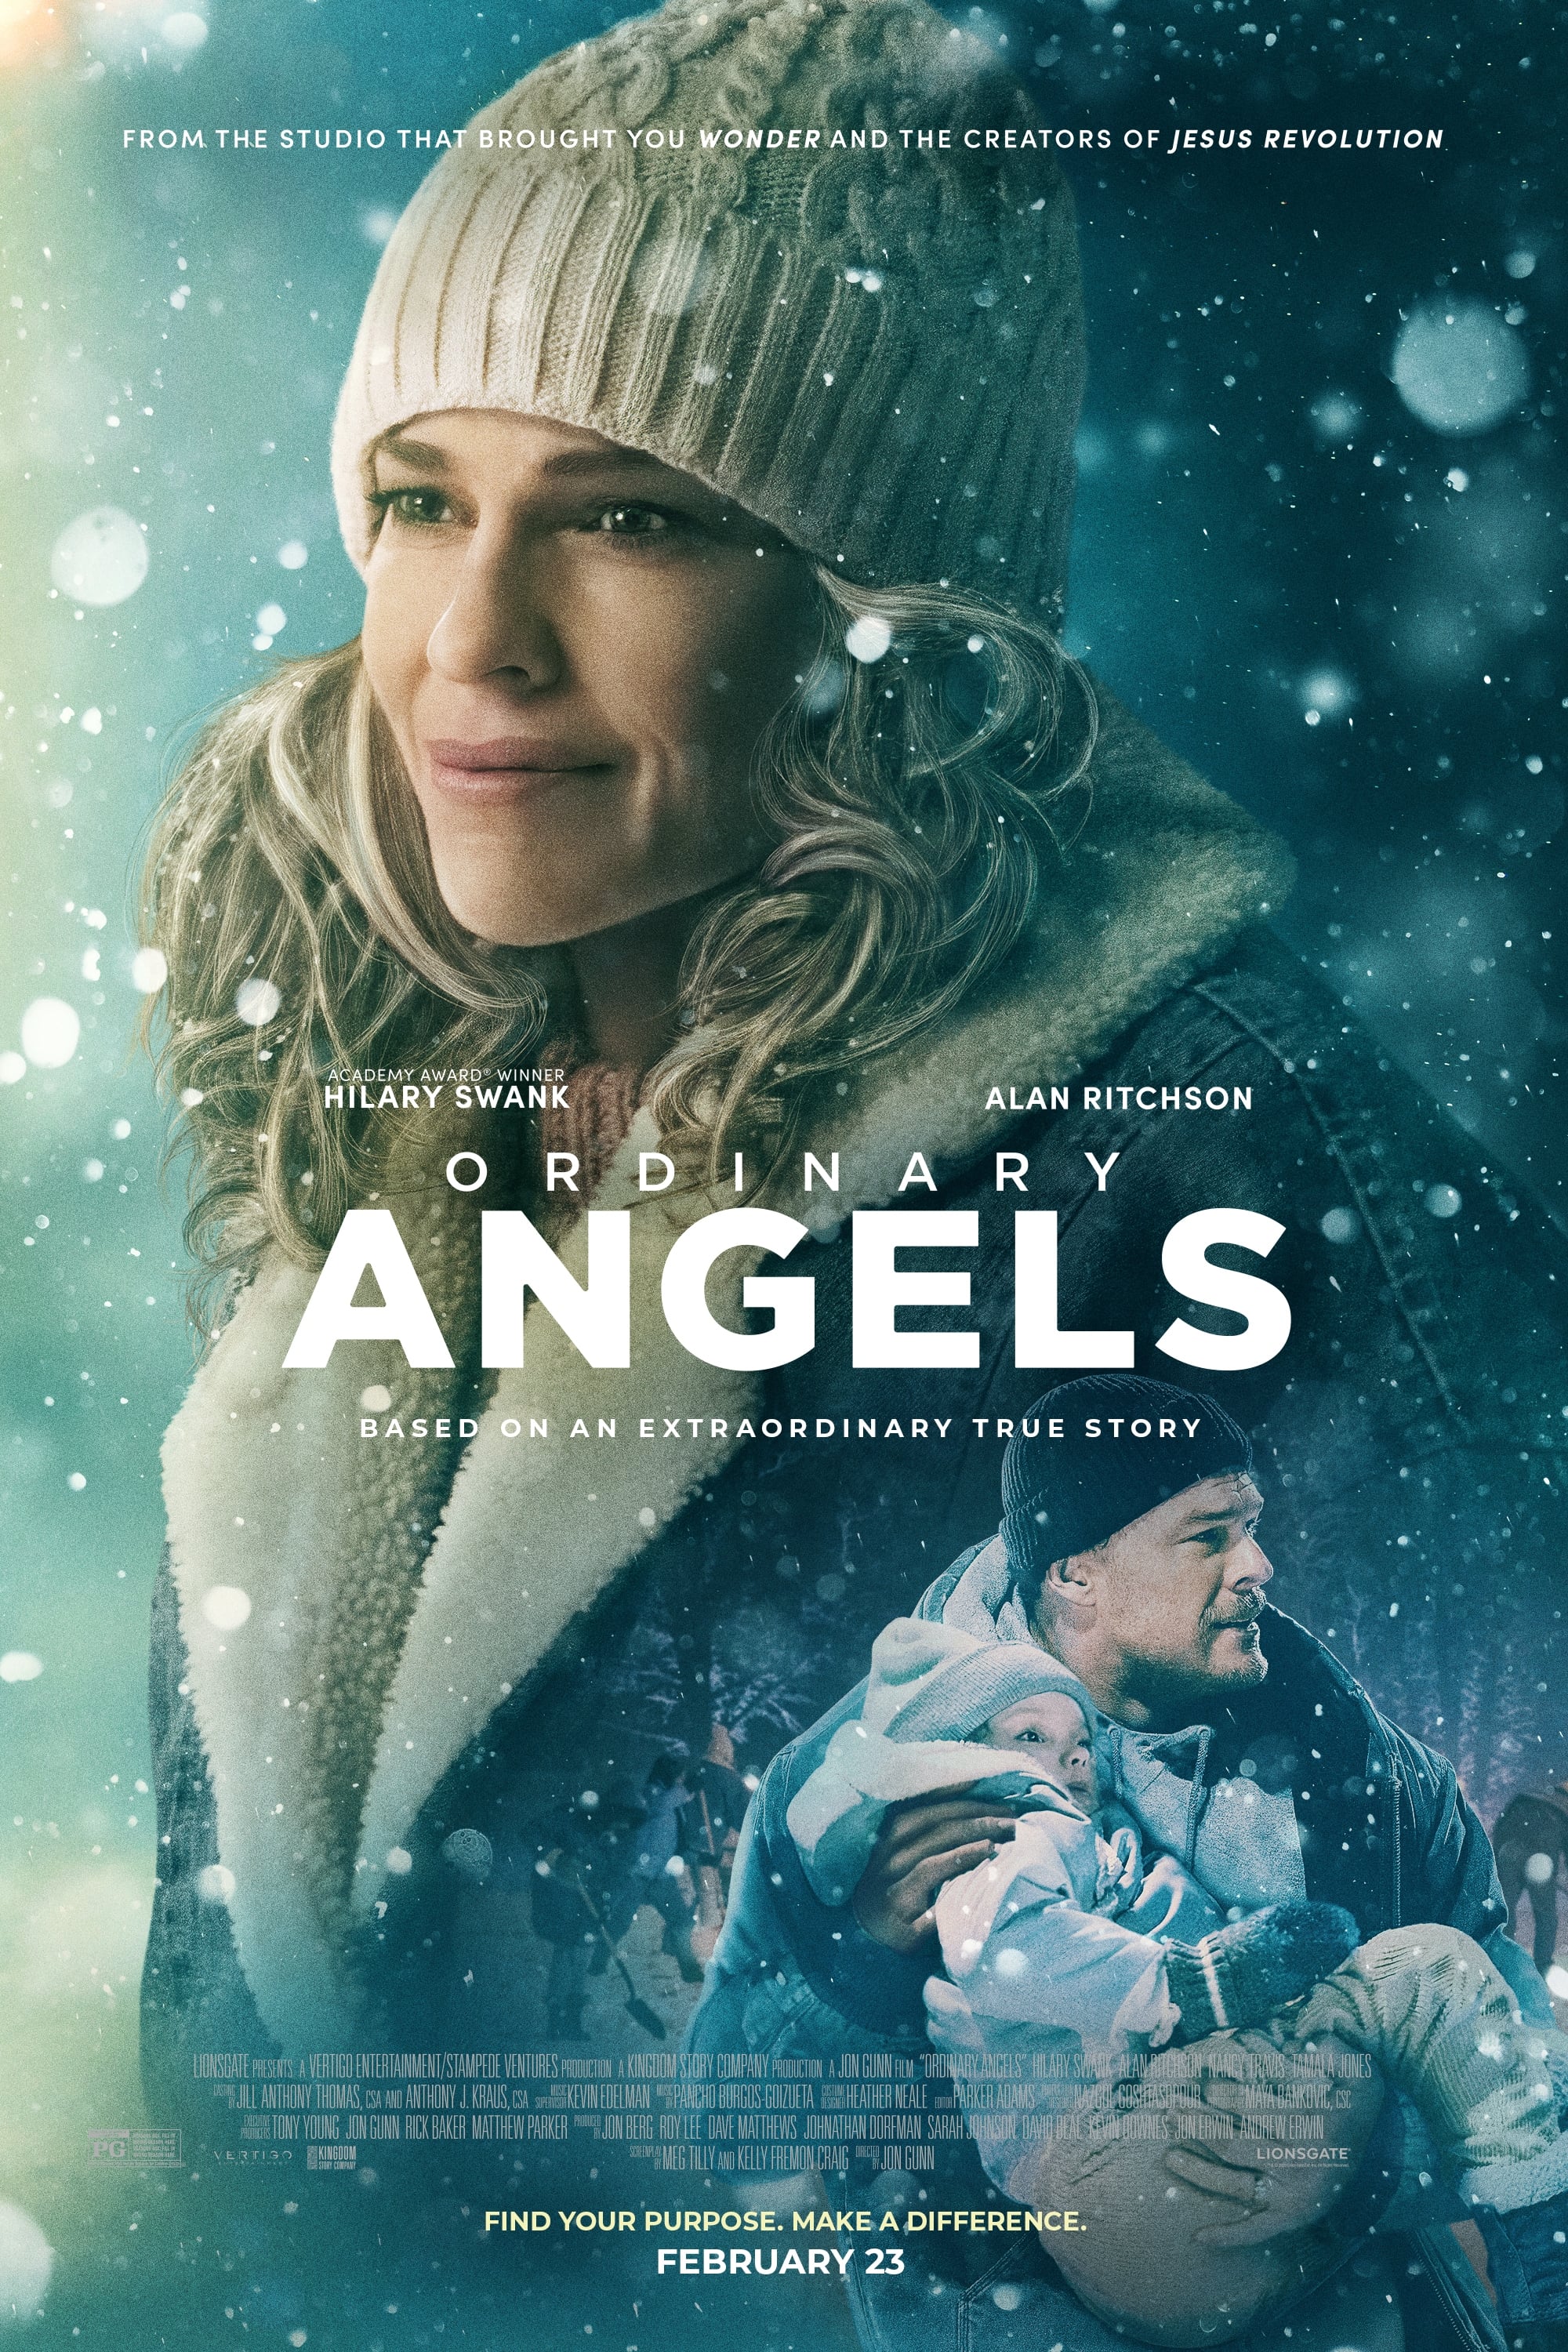 Poster for the movie "Ordinary Angels"